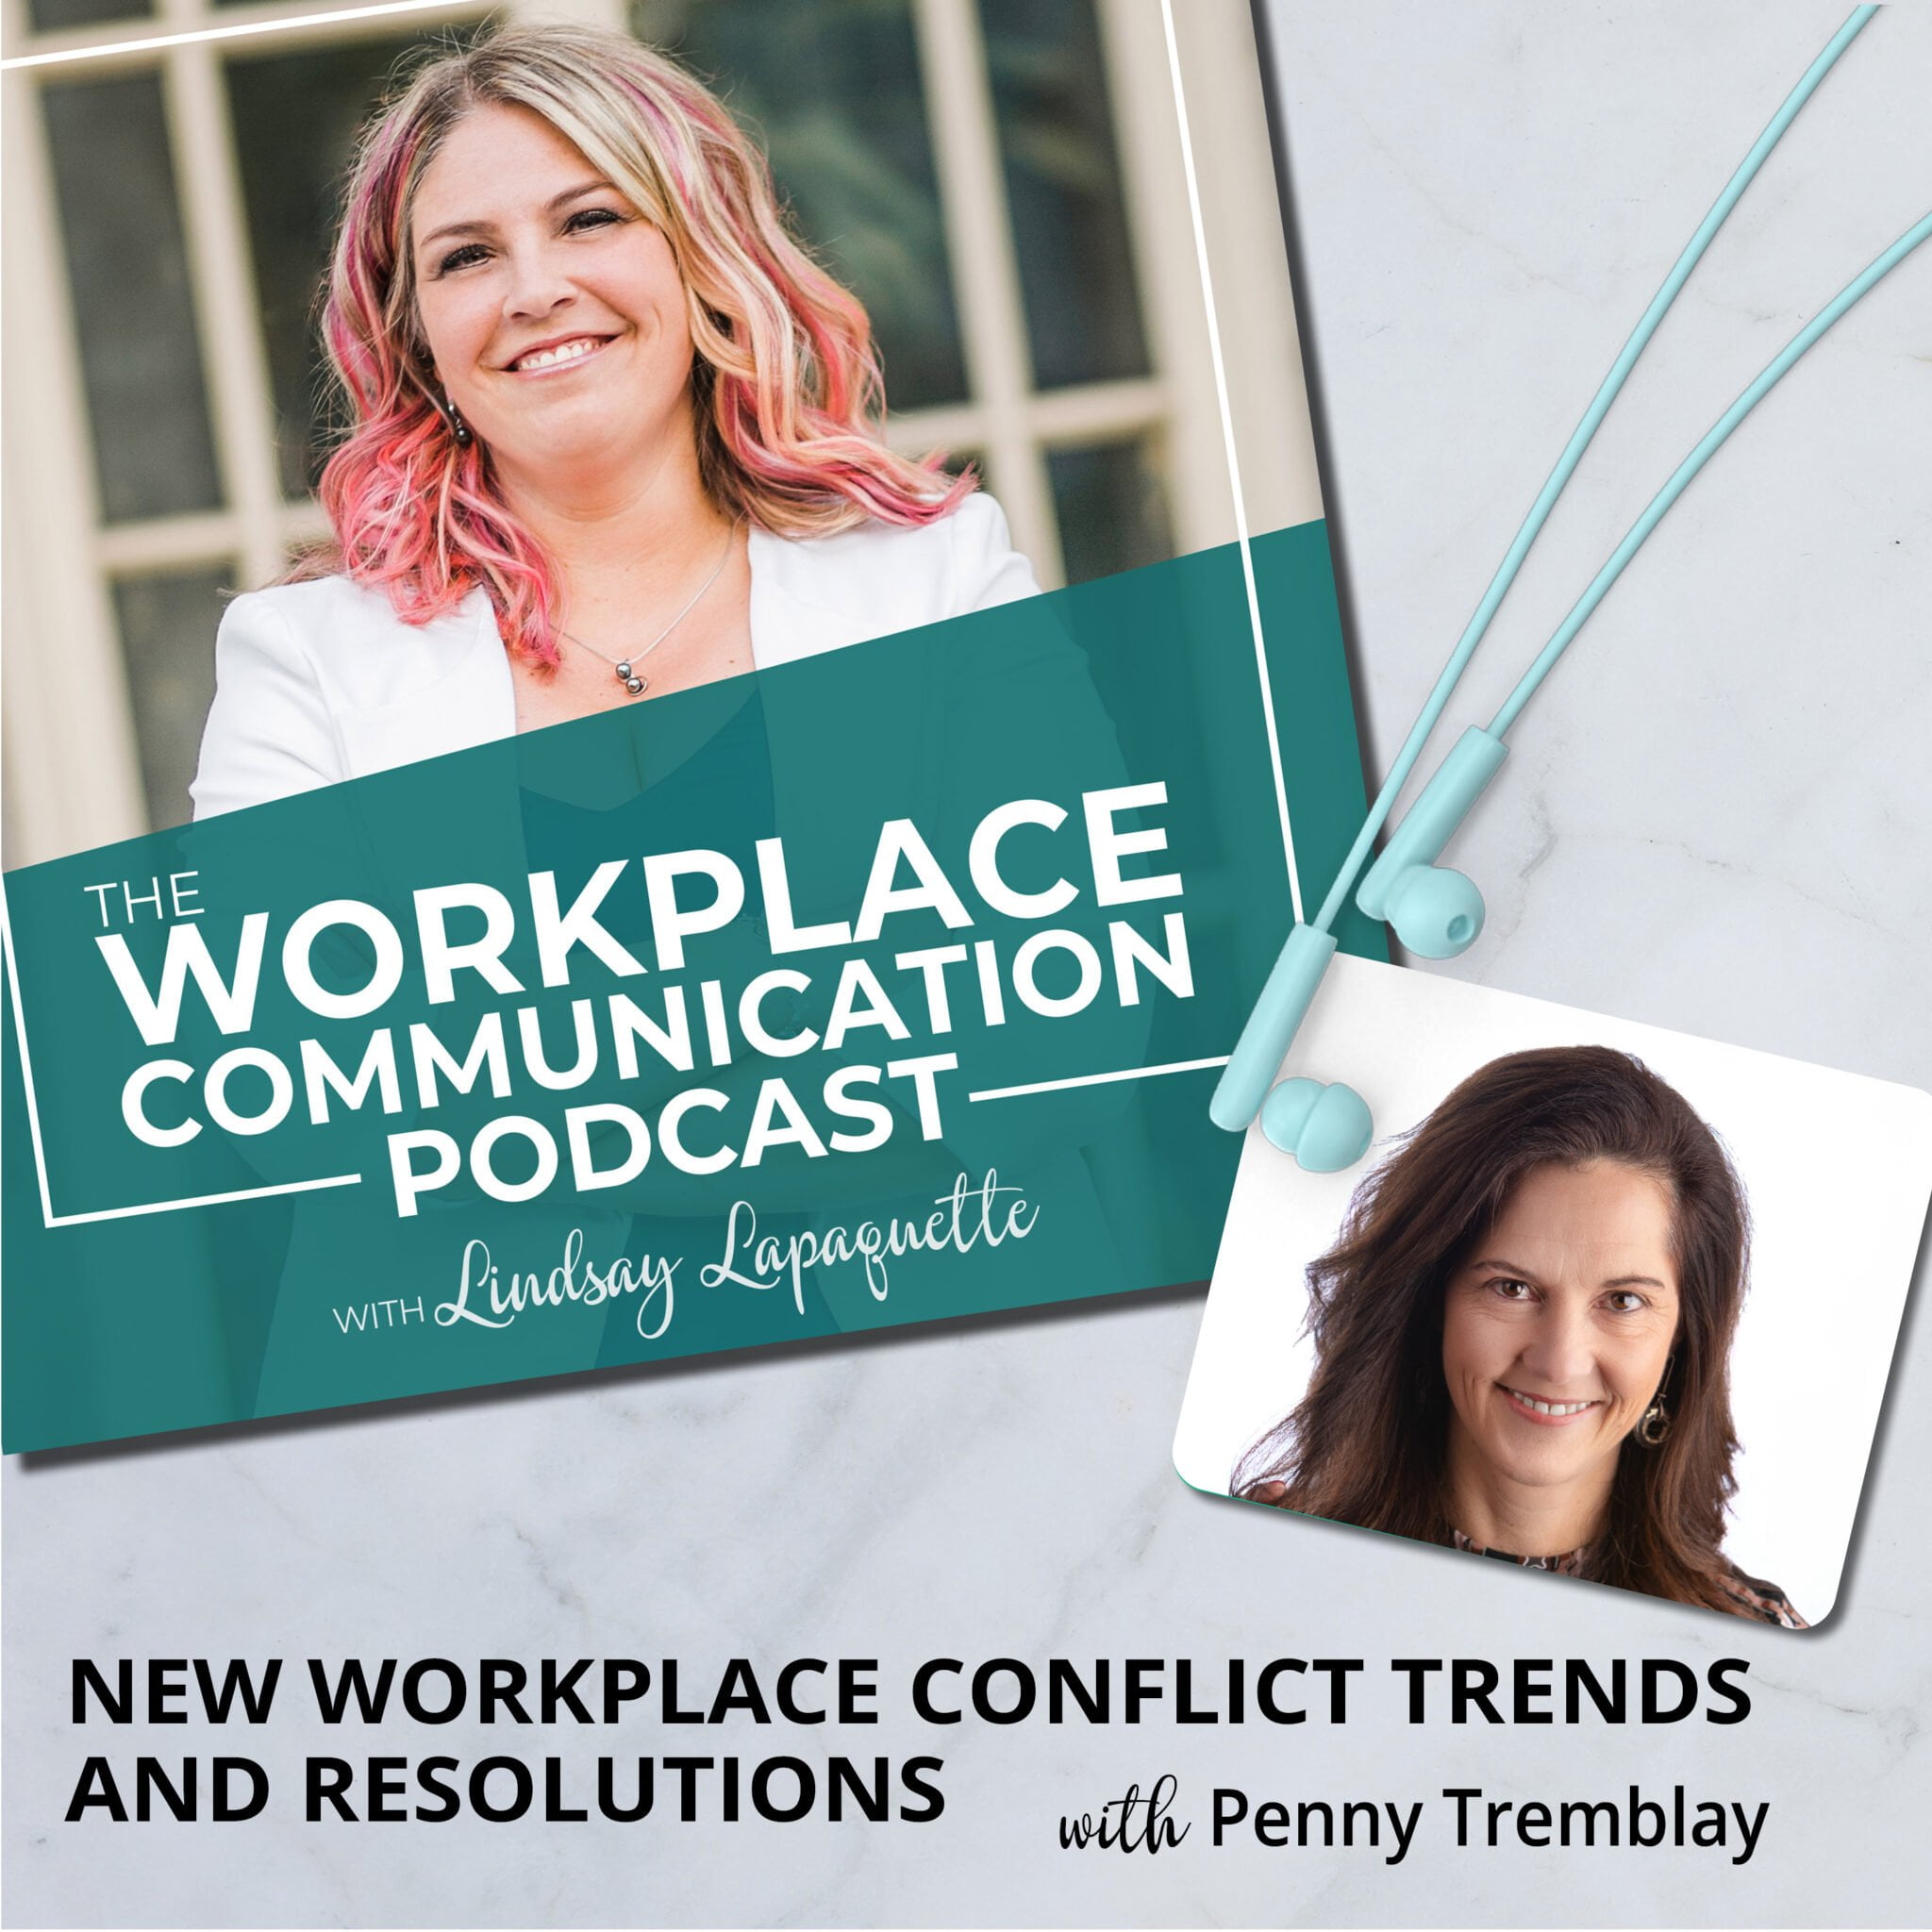 Lire la suite à propos de l’article #020 – The NEW Workplace Conflict Trends and Resolutions with Penny Tremblay